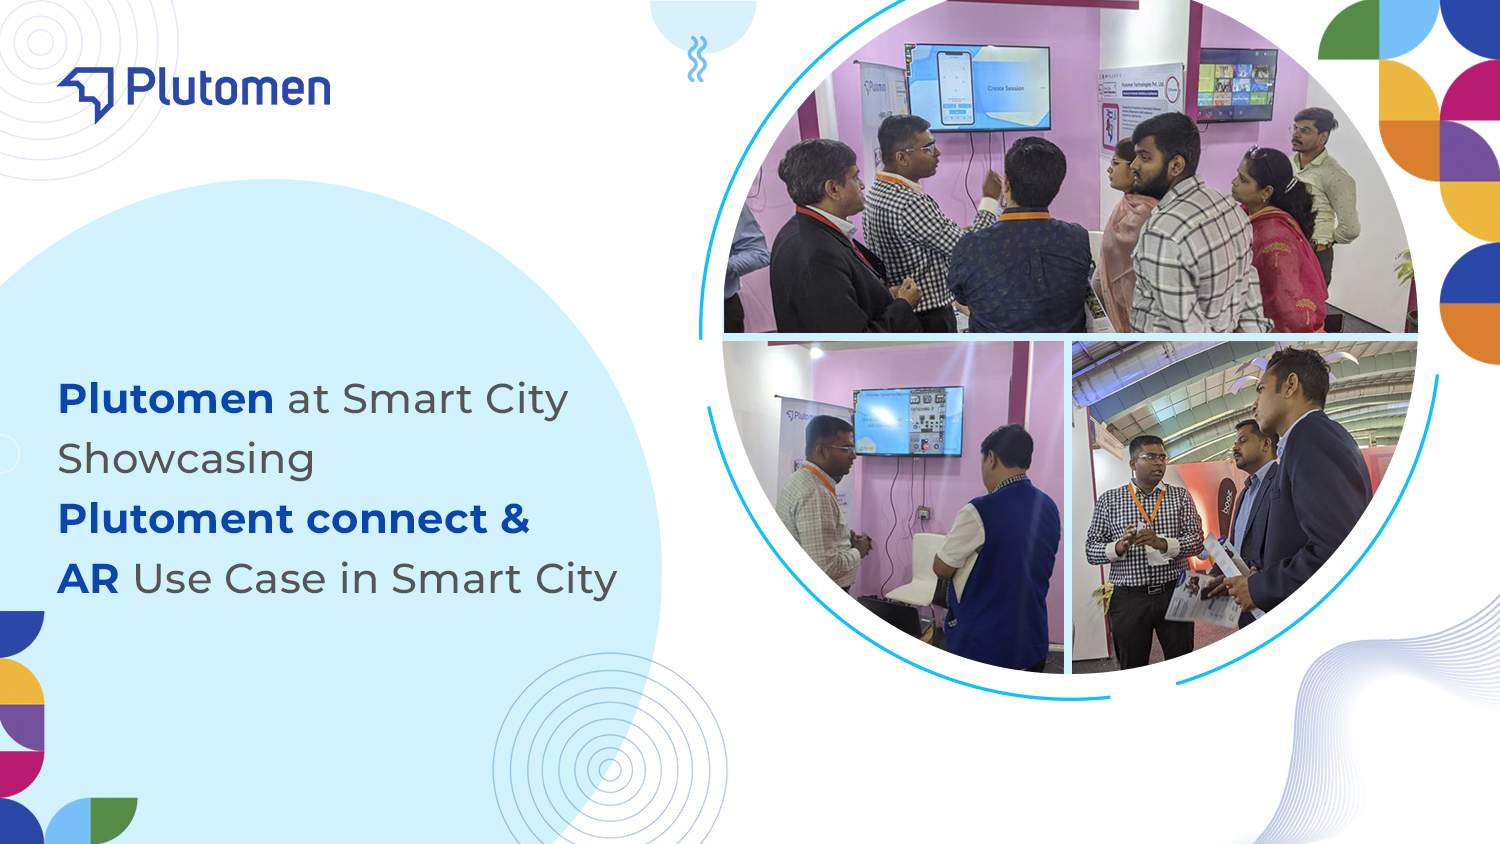 Plutomen at Smart City Showcasing Plutomen Connect & AR Use Cases in Smart City 